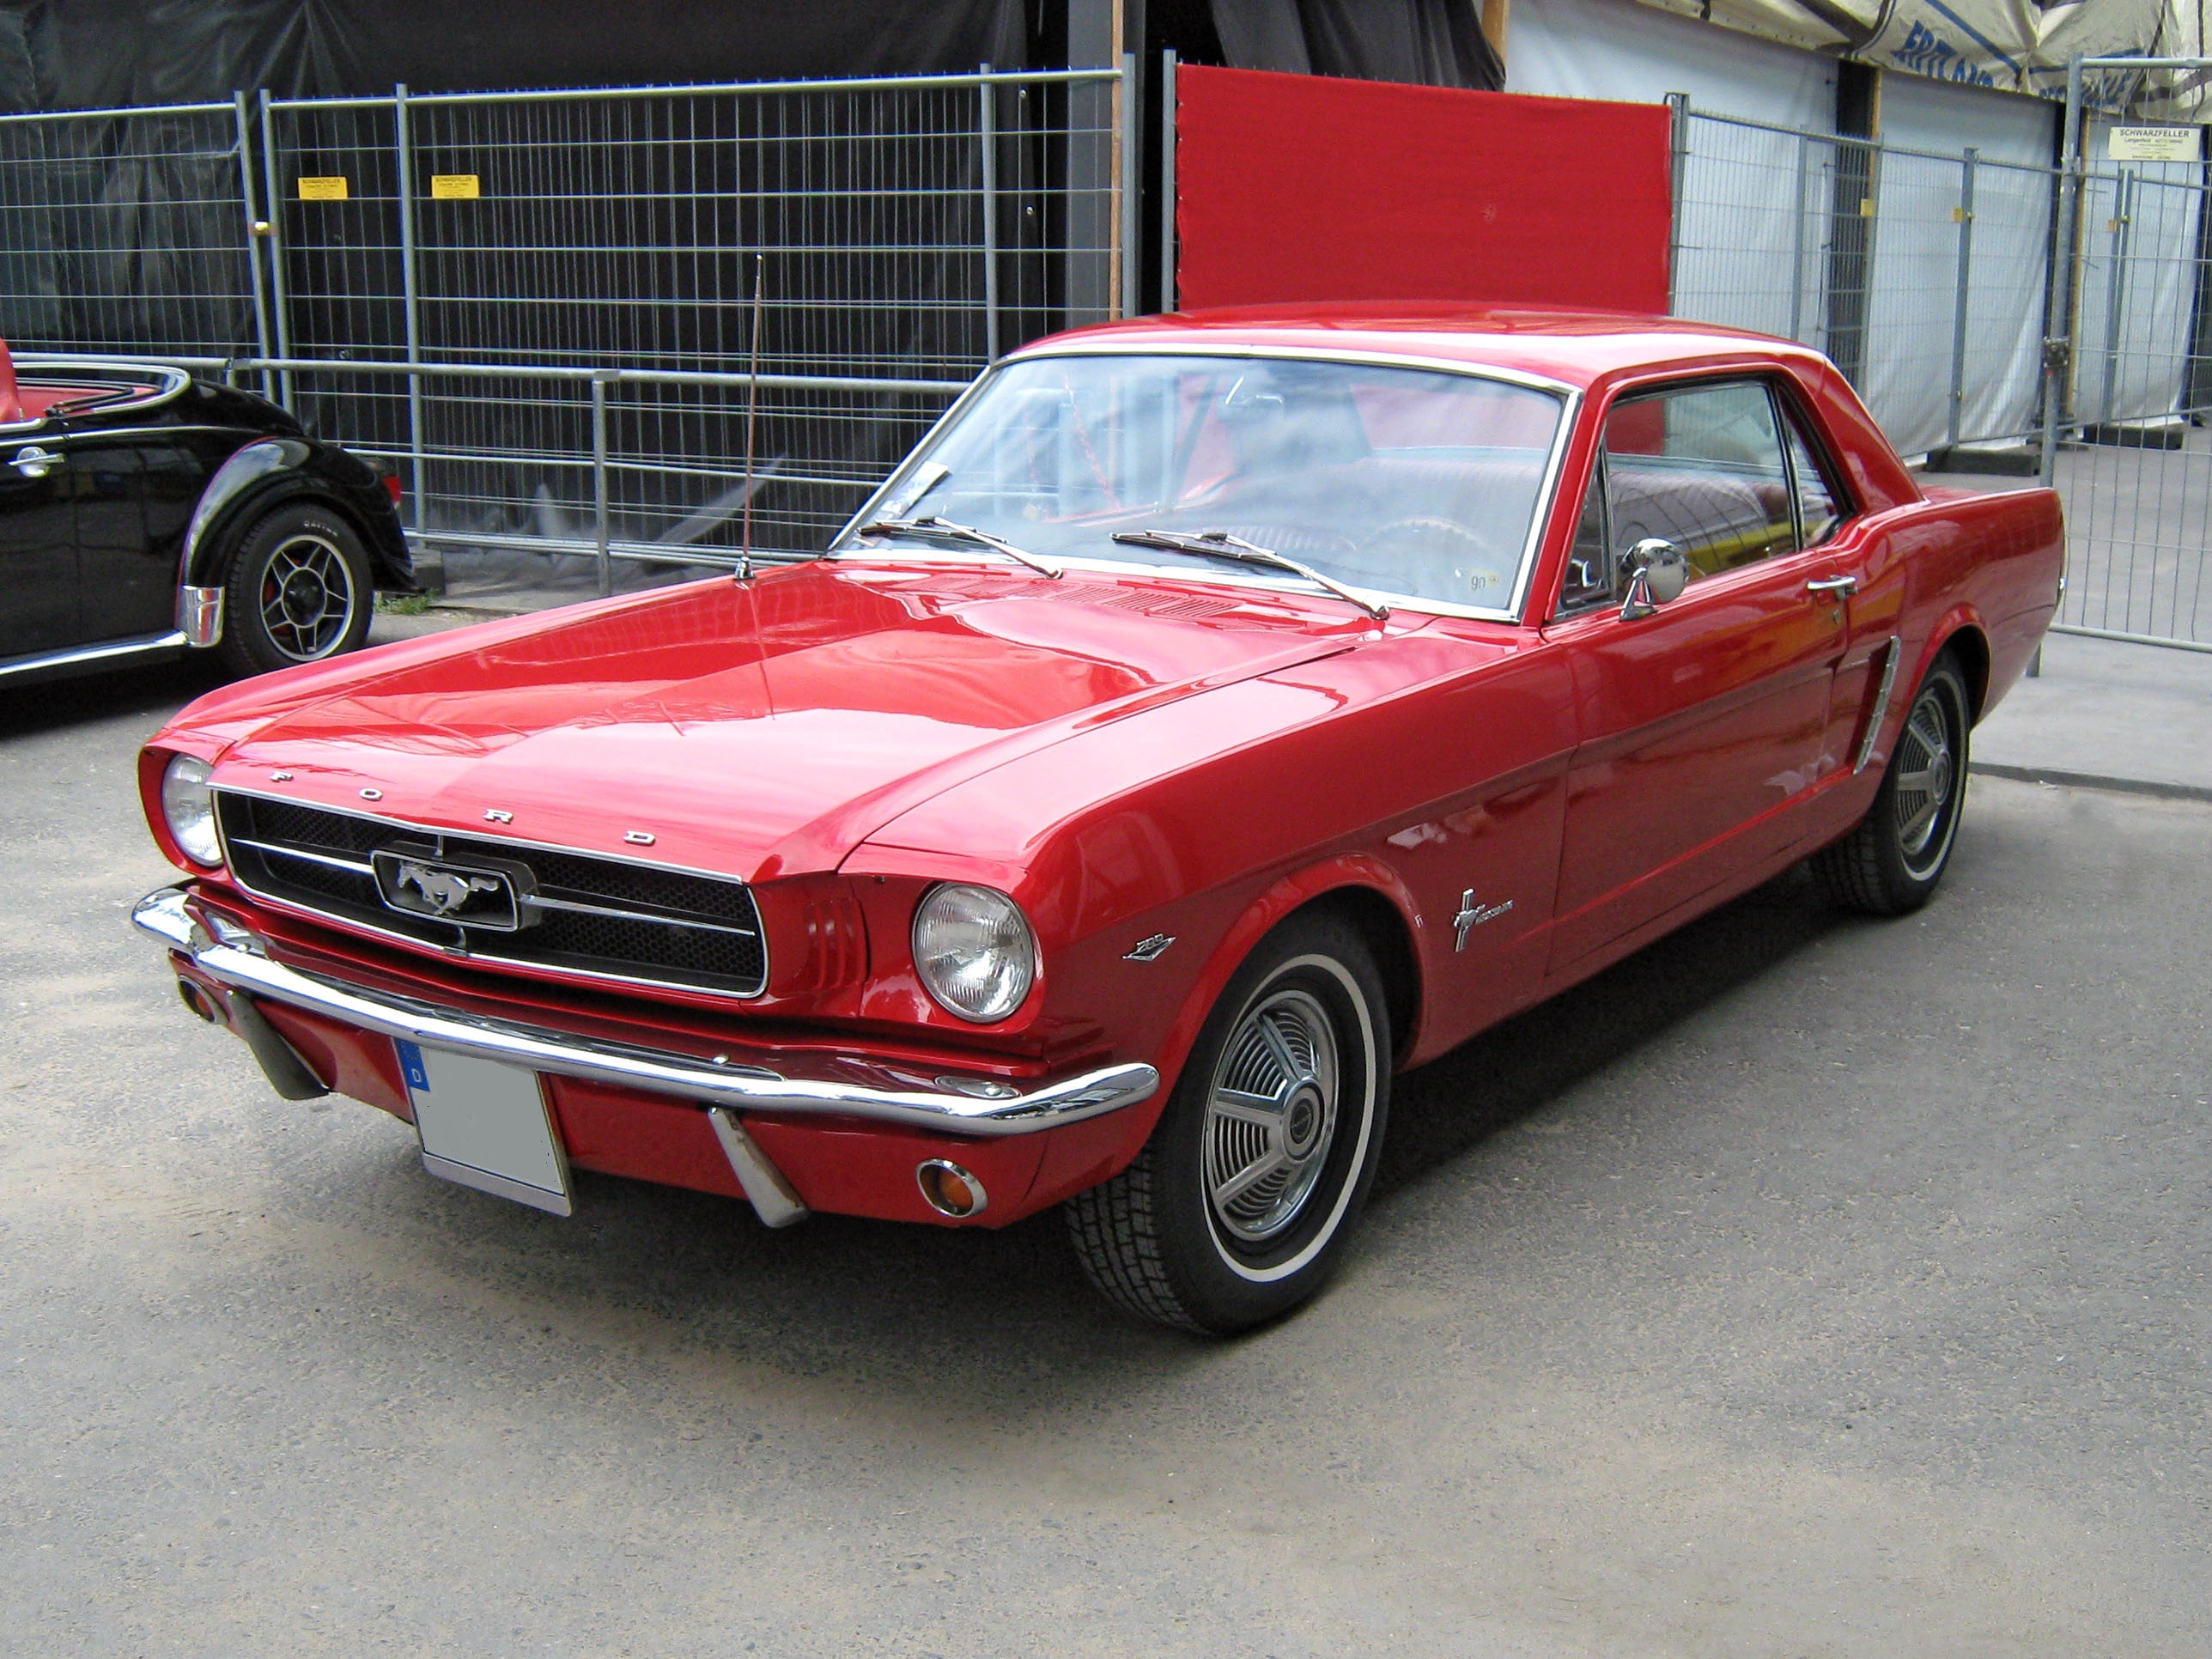 front view, ford, mustang, cars, 1965, hard roof